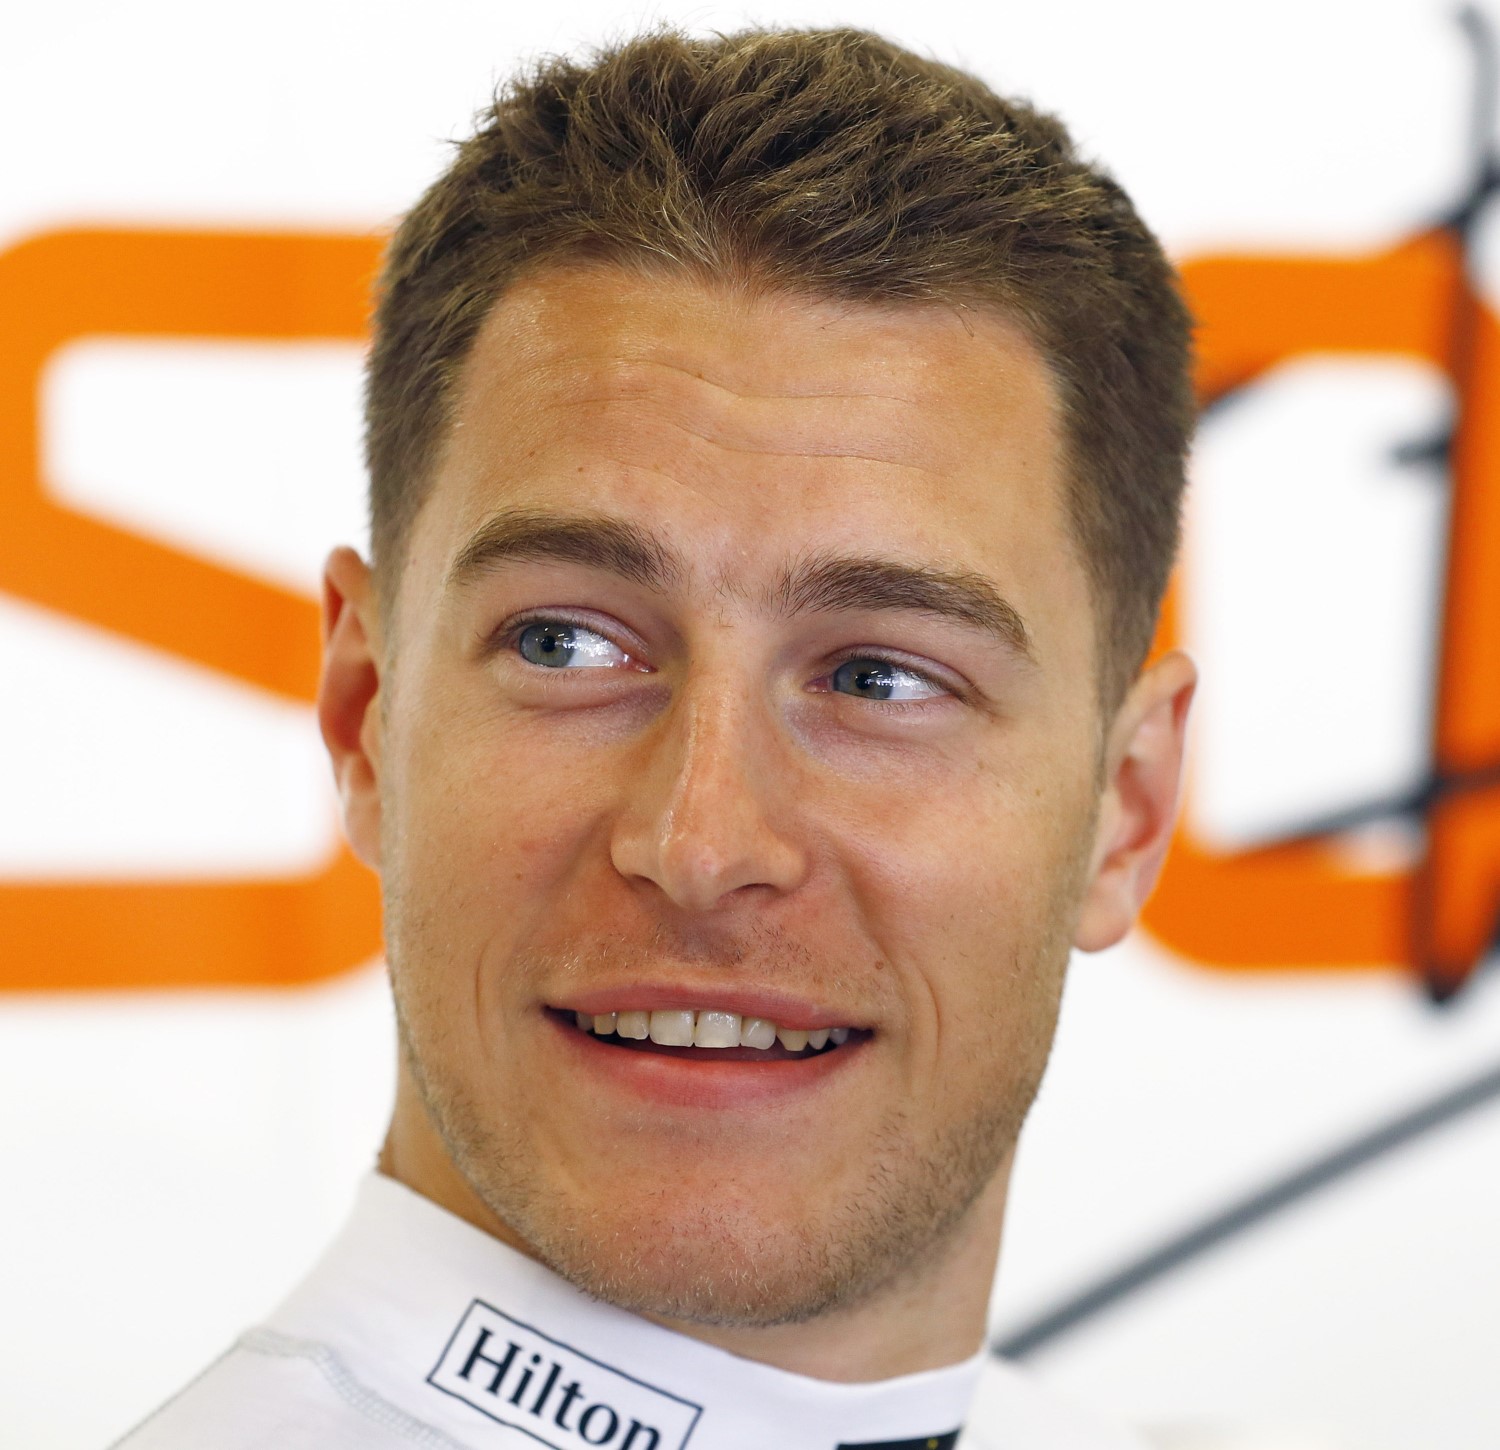 Vandoorne was just the latest F1 driver who's career was ruined by McLaren